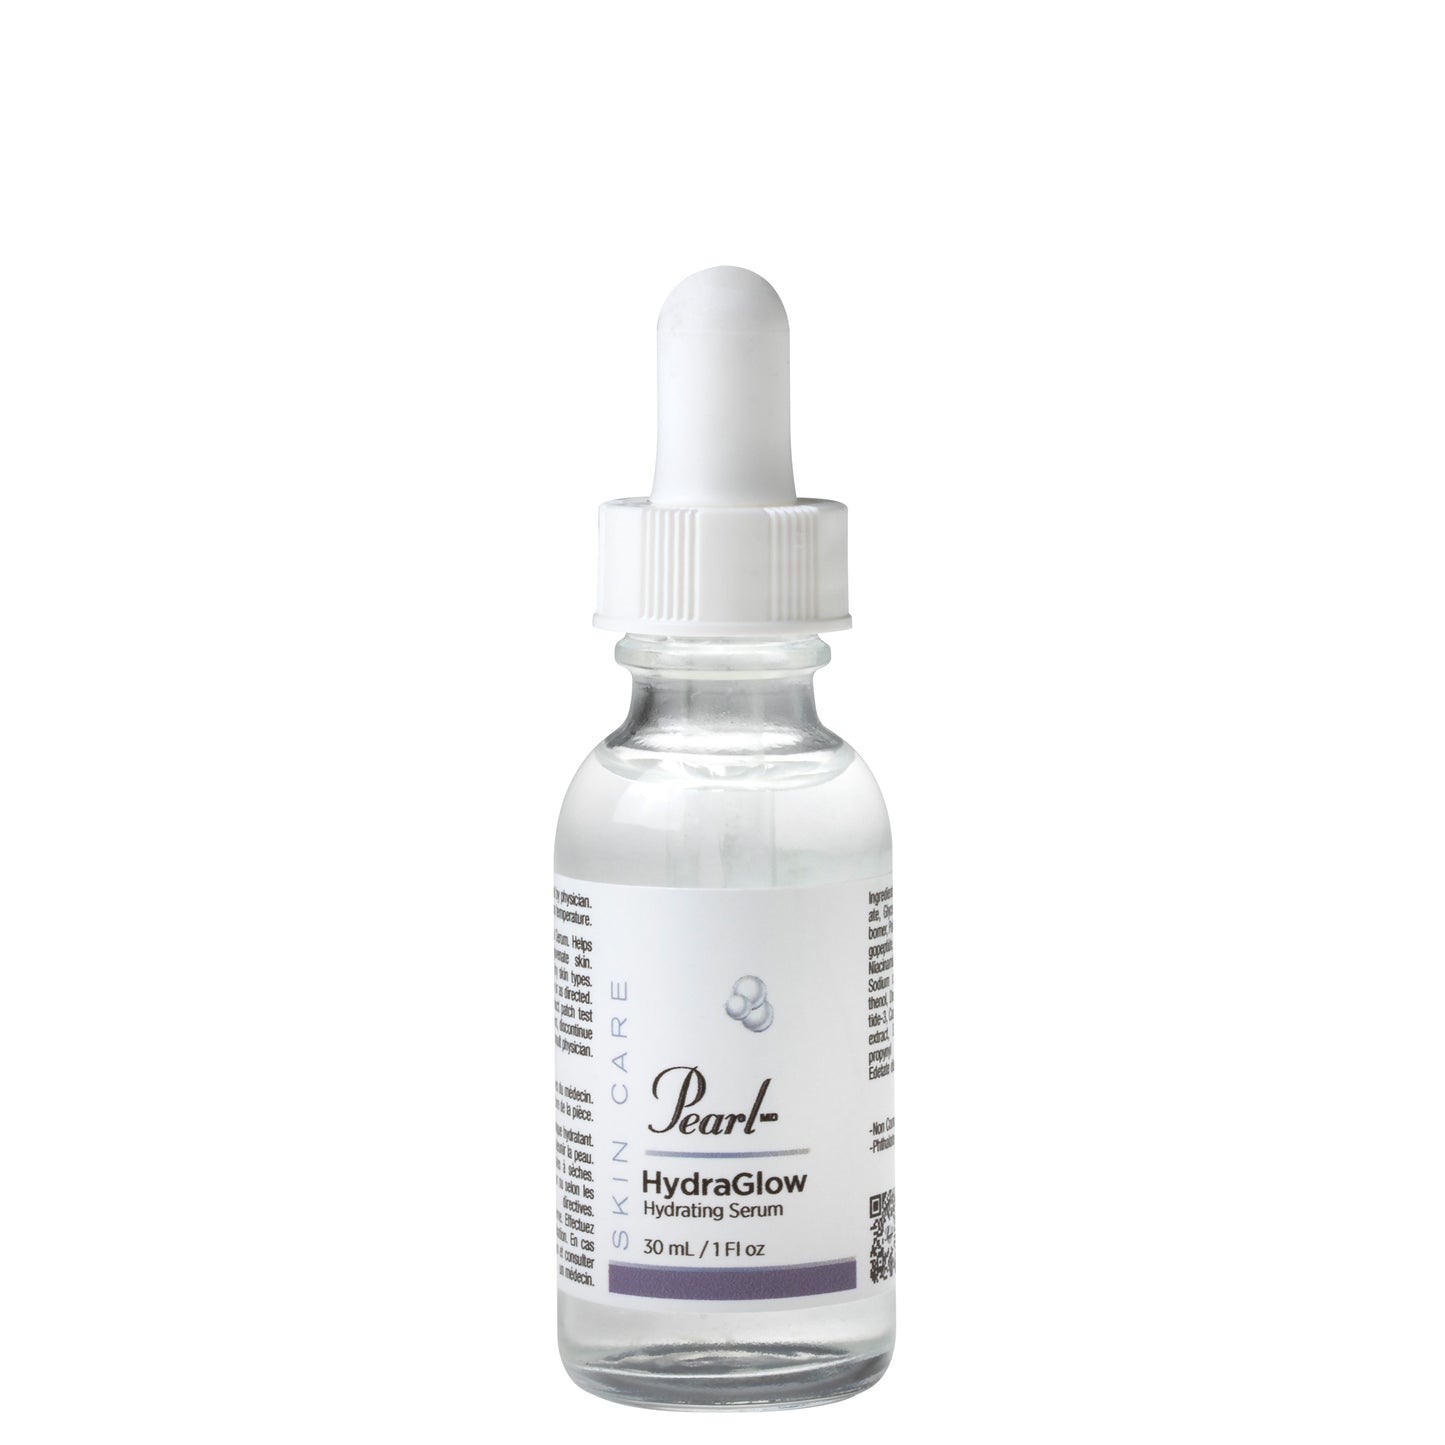 PearlMD Skincare HydraGlow Serum, this oil-free hydrating serum contains pure sodium hyaluronate to enhance skin moisture as well as peptides and glycosaminoglycans to improve the appearance of skin tone and texture and reduce the signs of photo-aging